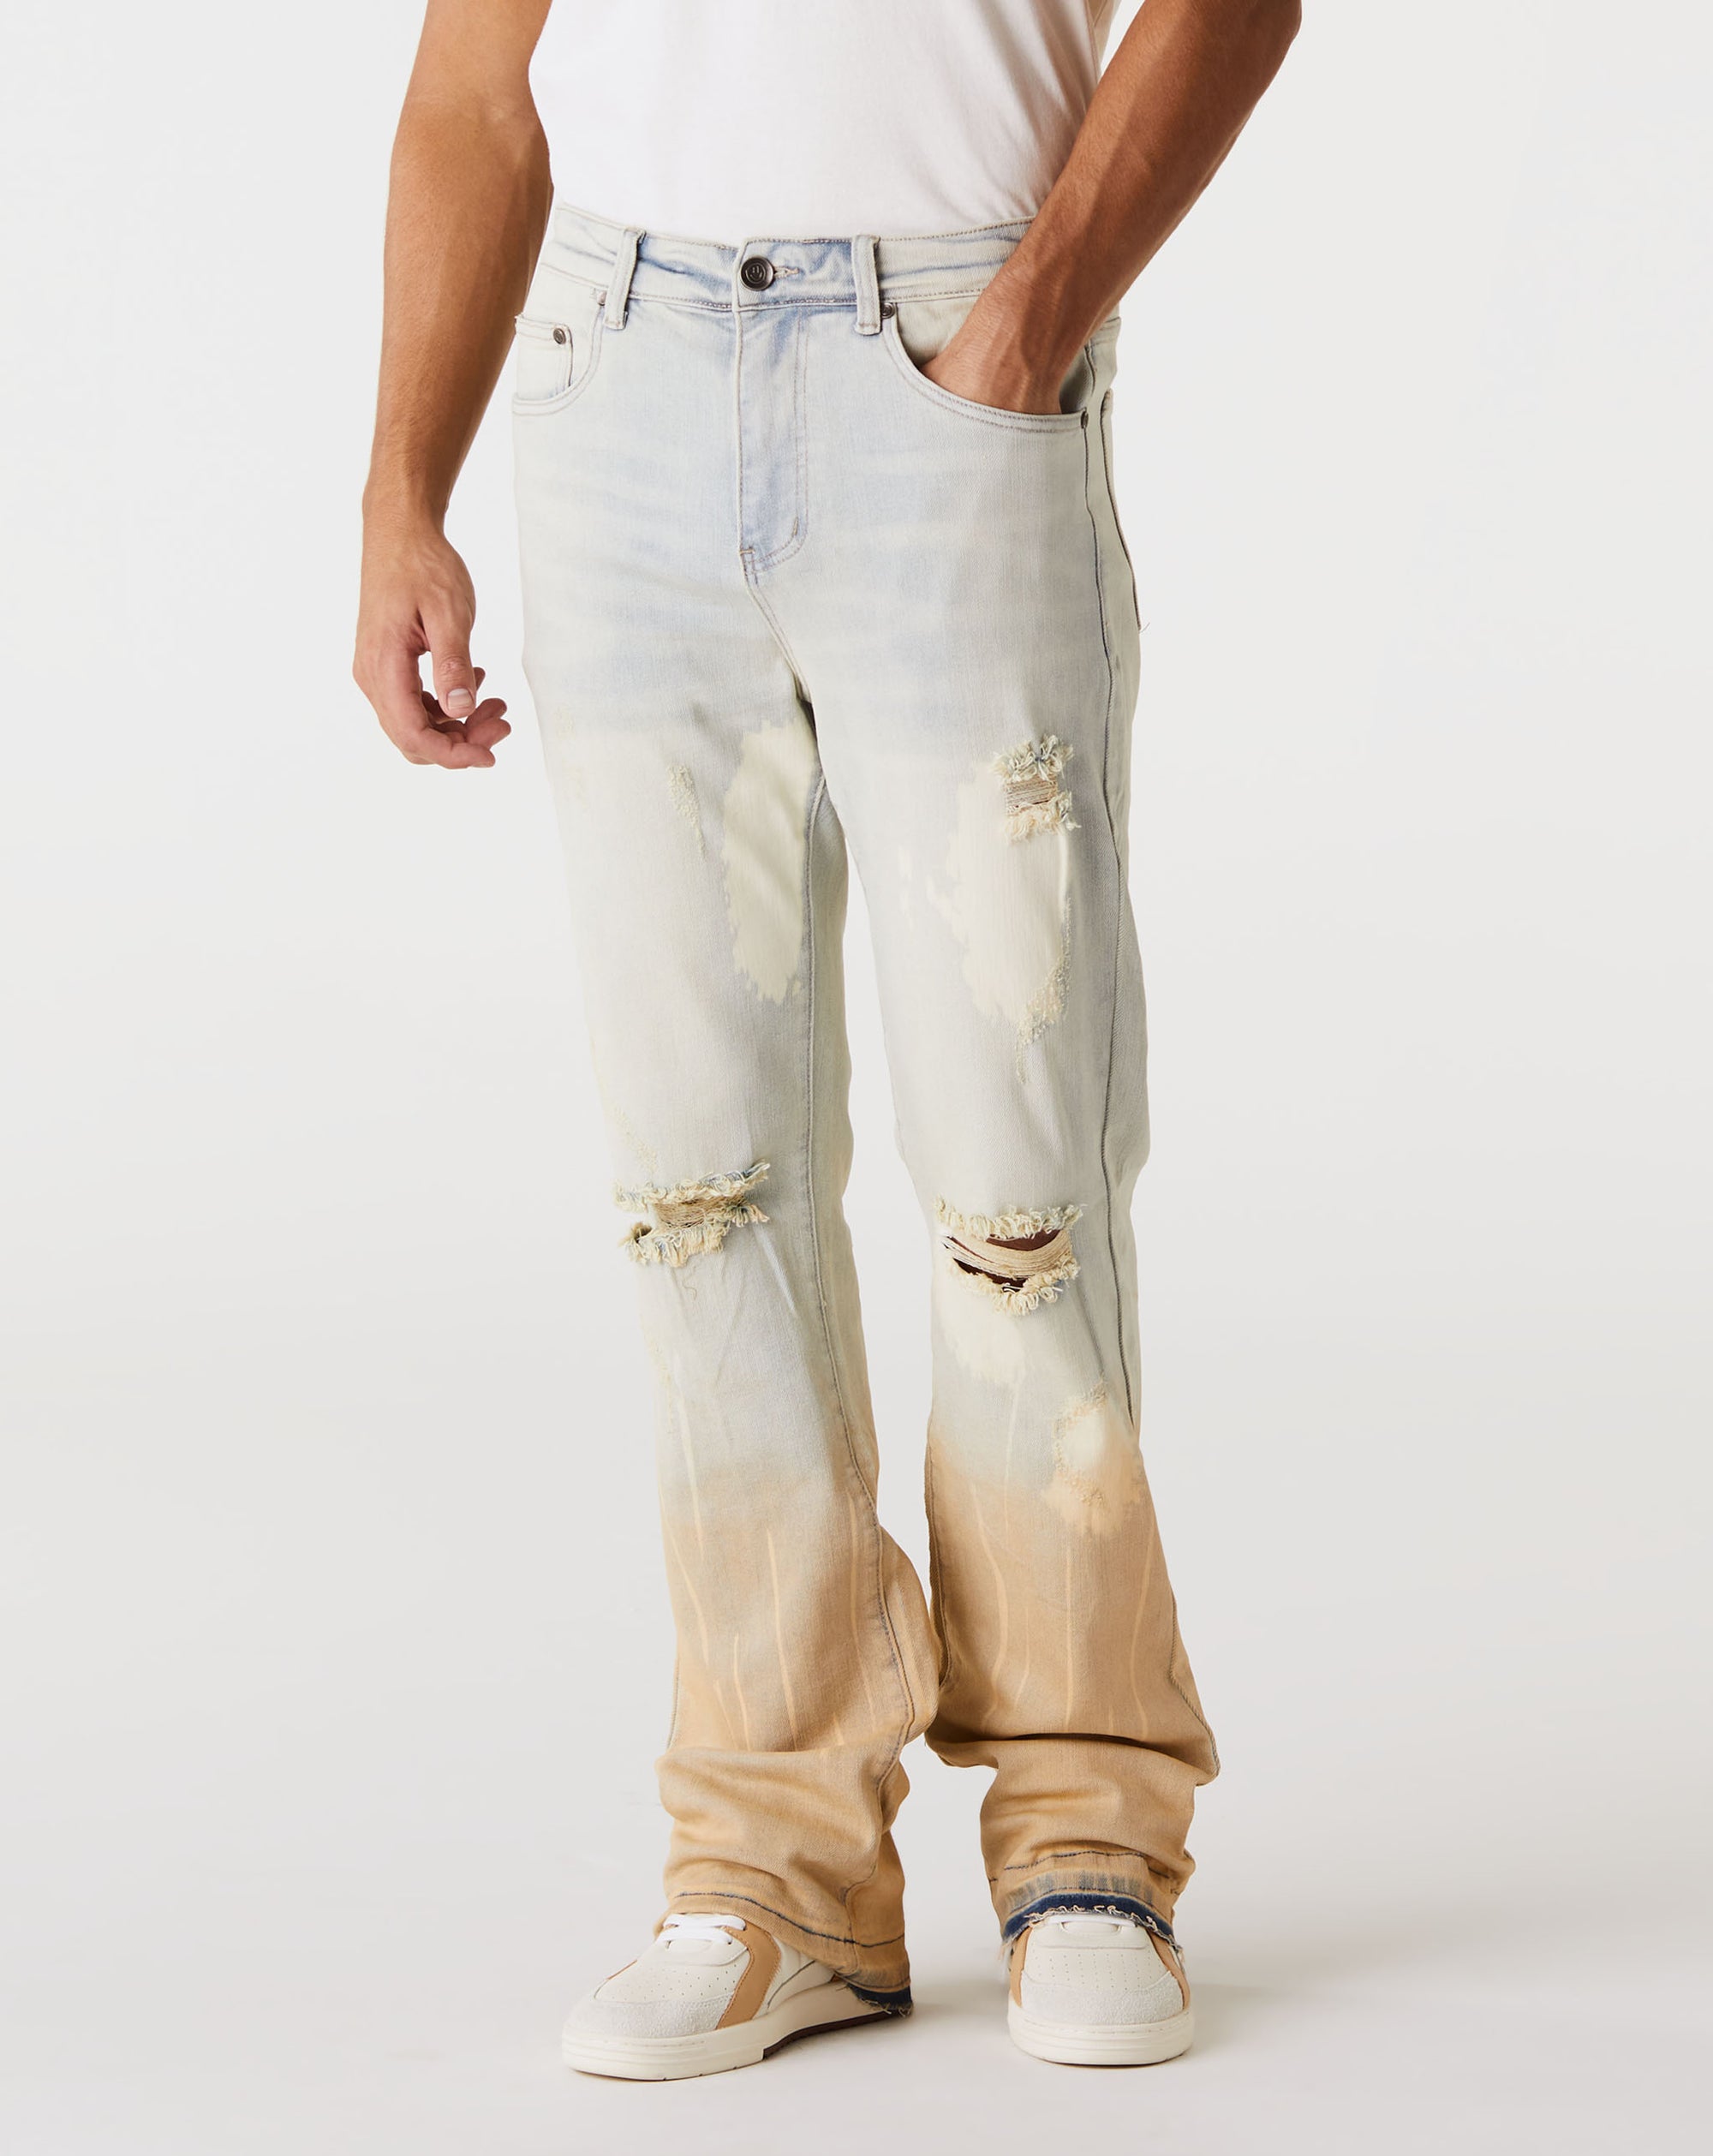 Sugarhill Saturn Stacked Jeans - Rule of Next Apparel